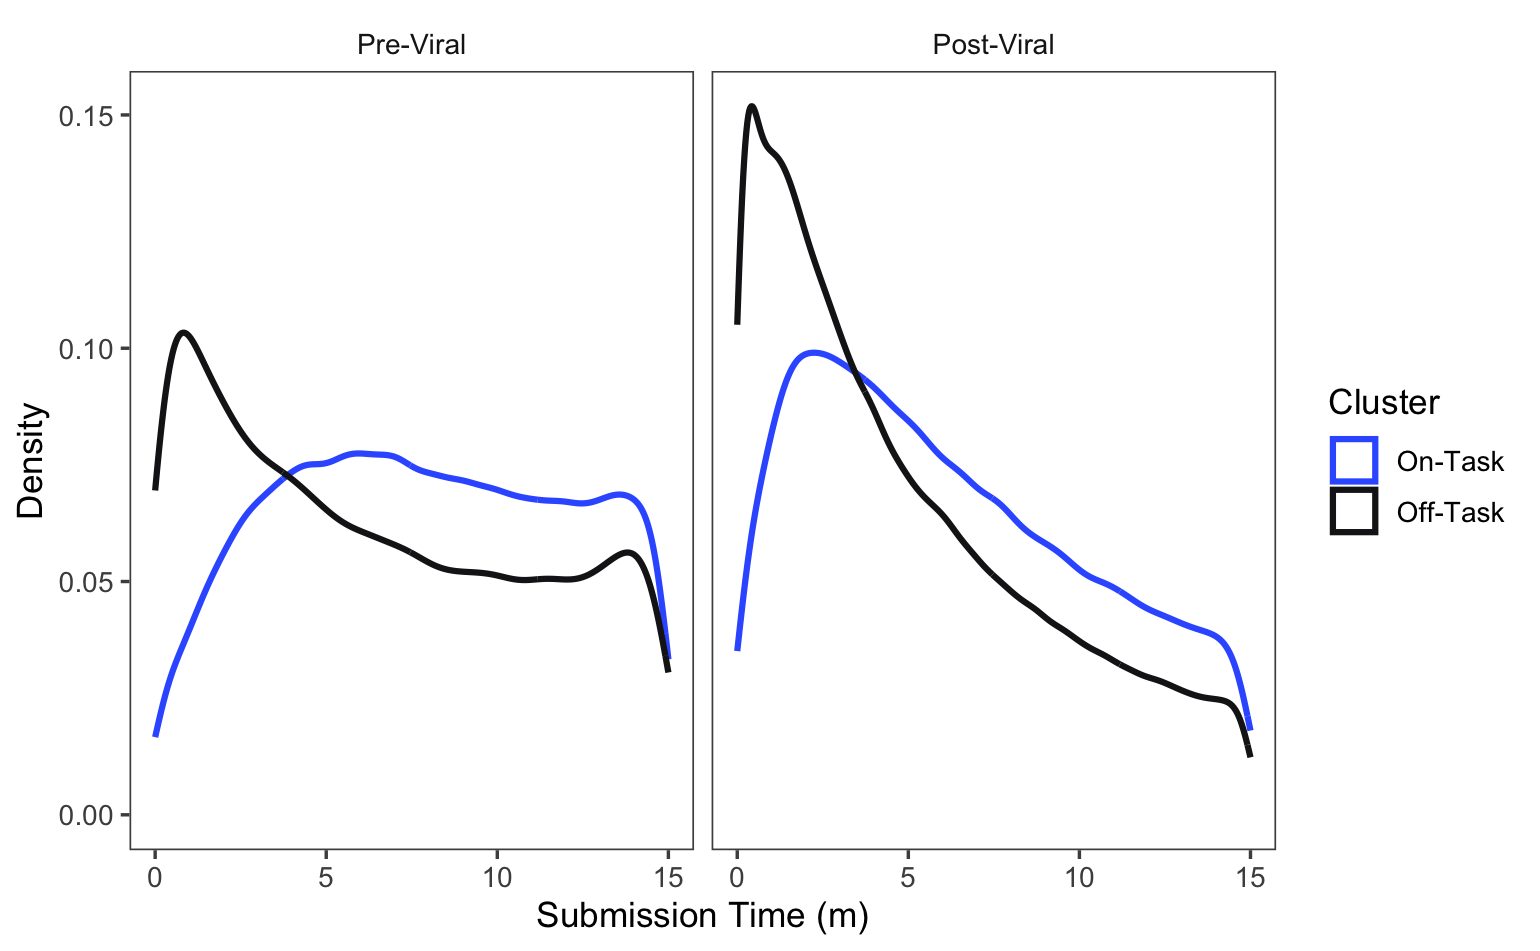 Submission Times Across Clusters in Pre- and Post-Viral Samples